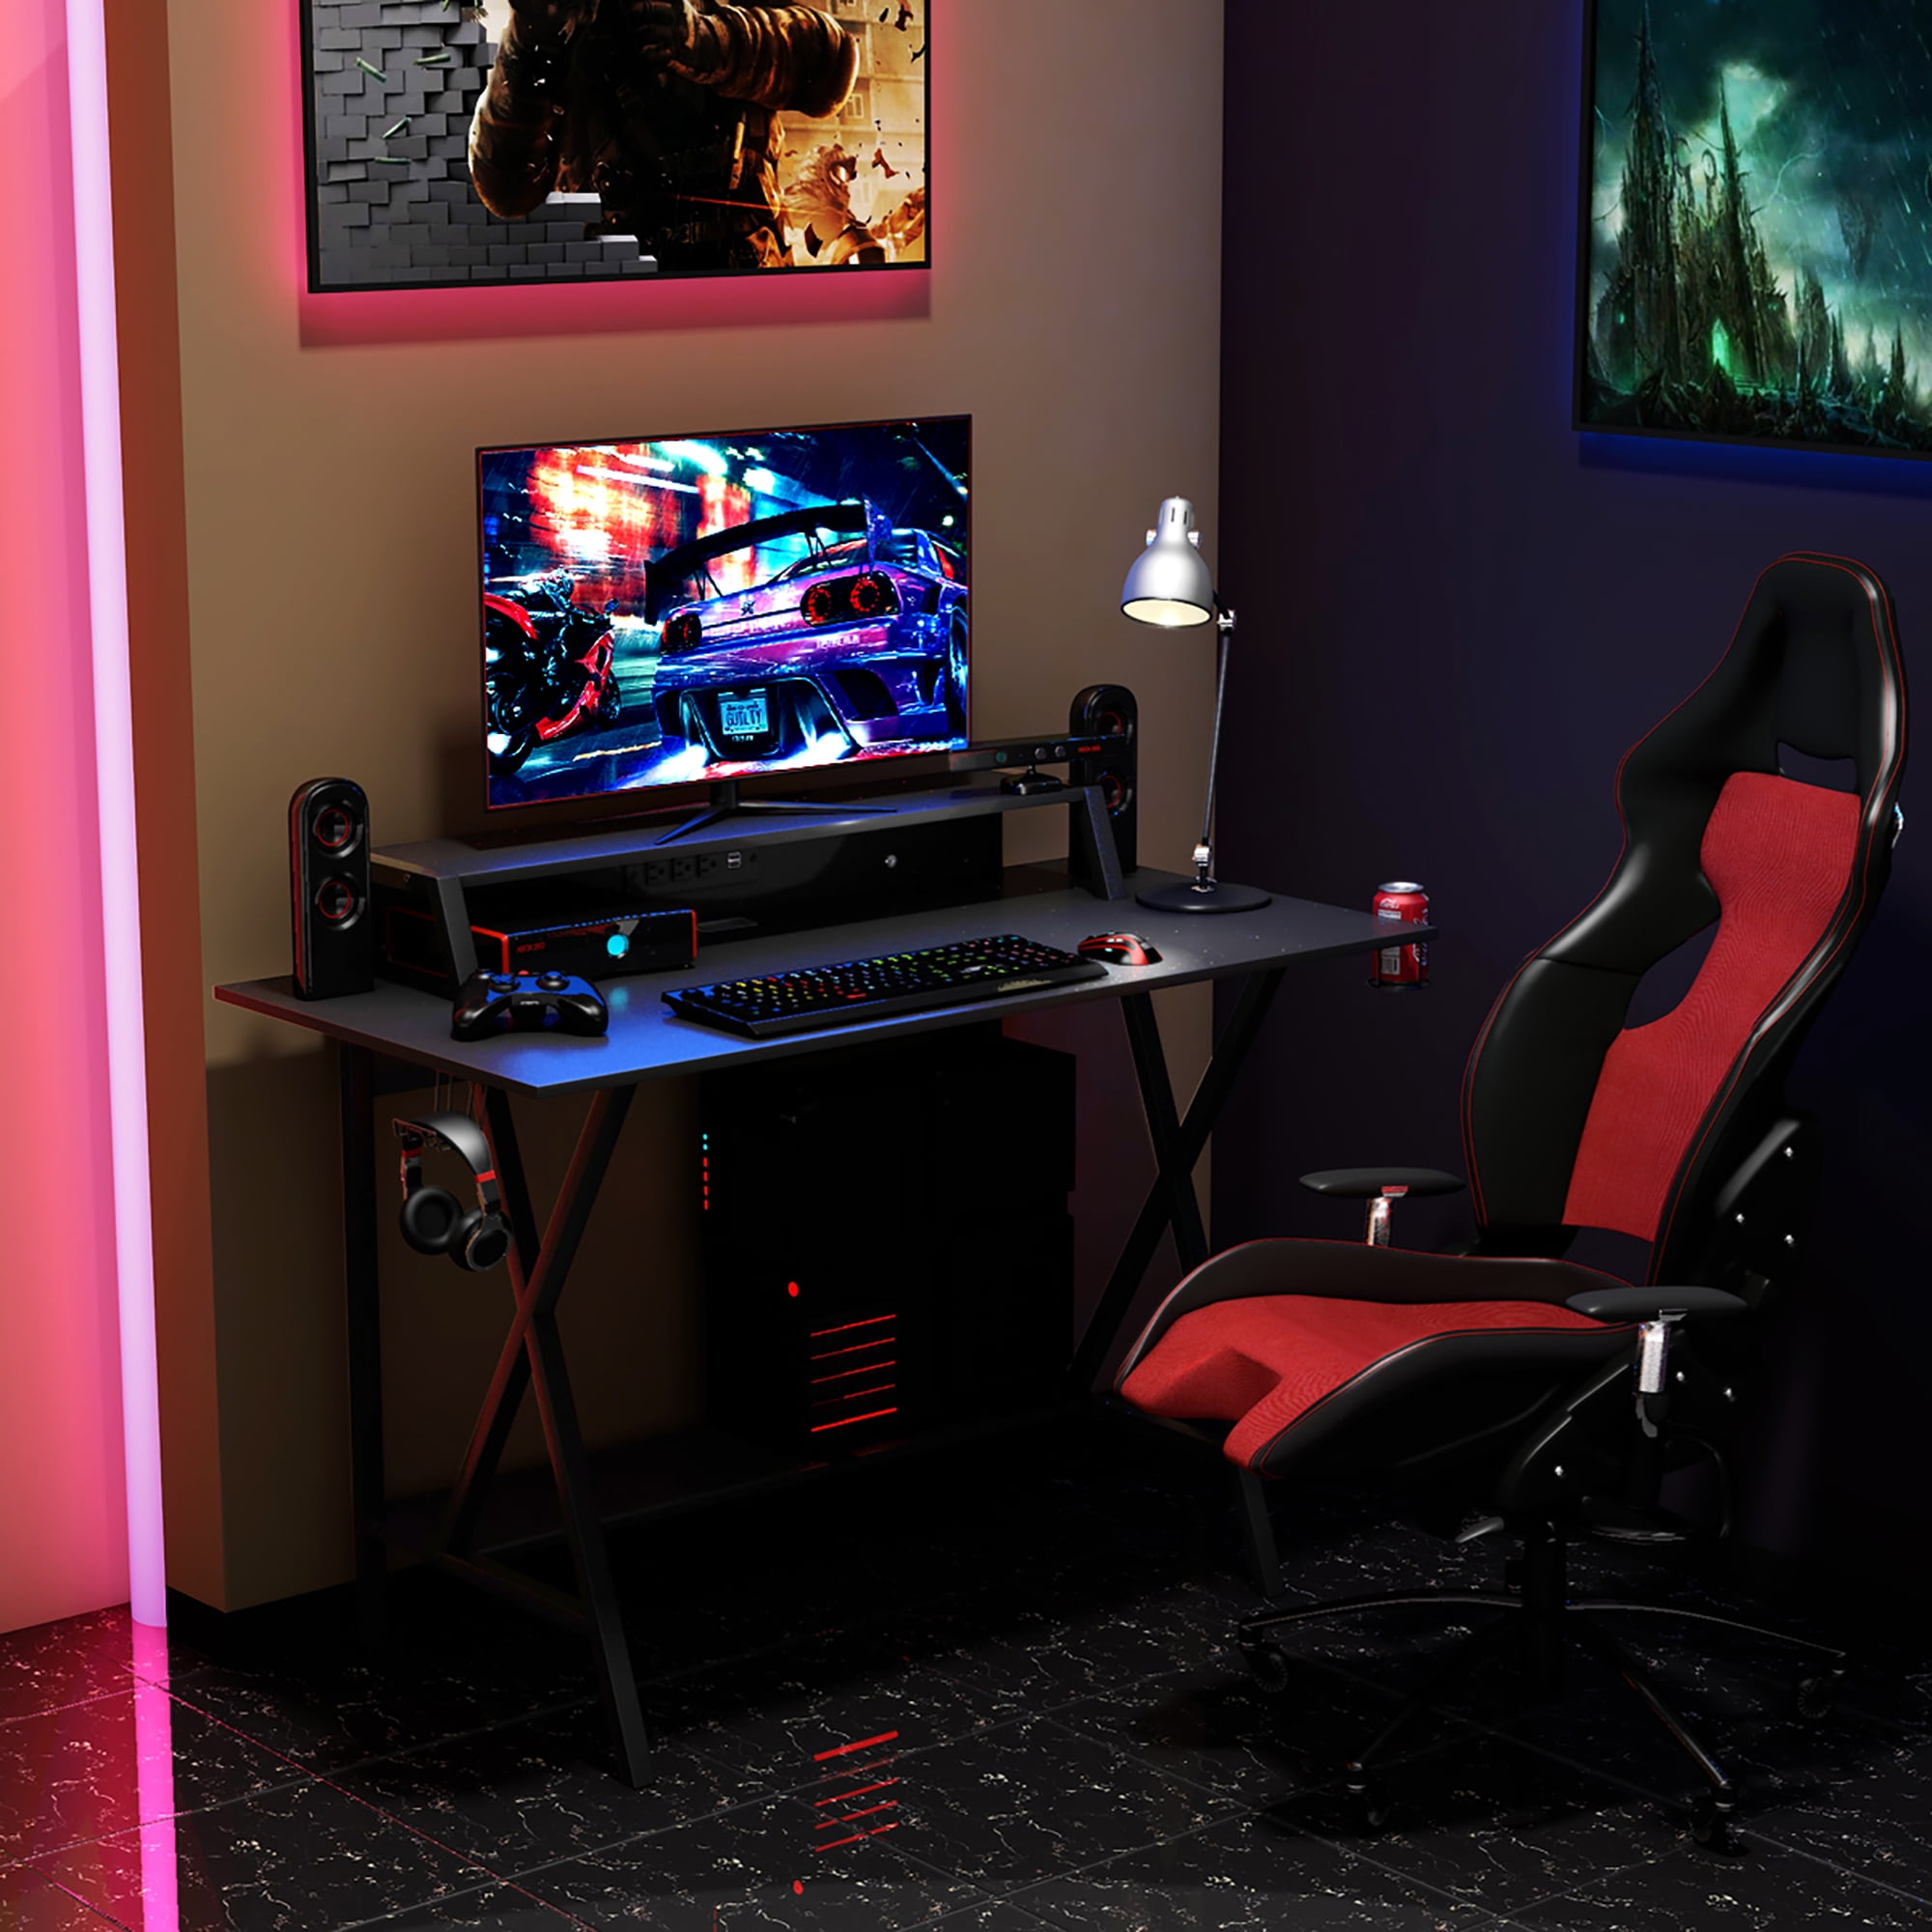 Cool Gaming Desk Accessories For Every Gamer - Desky USA